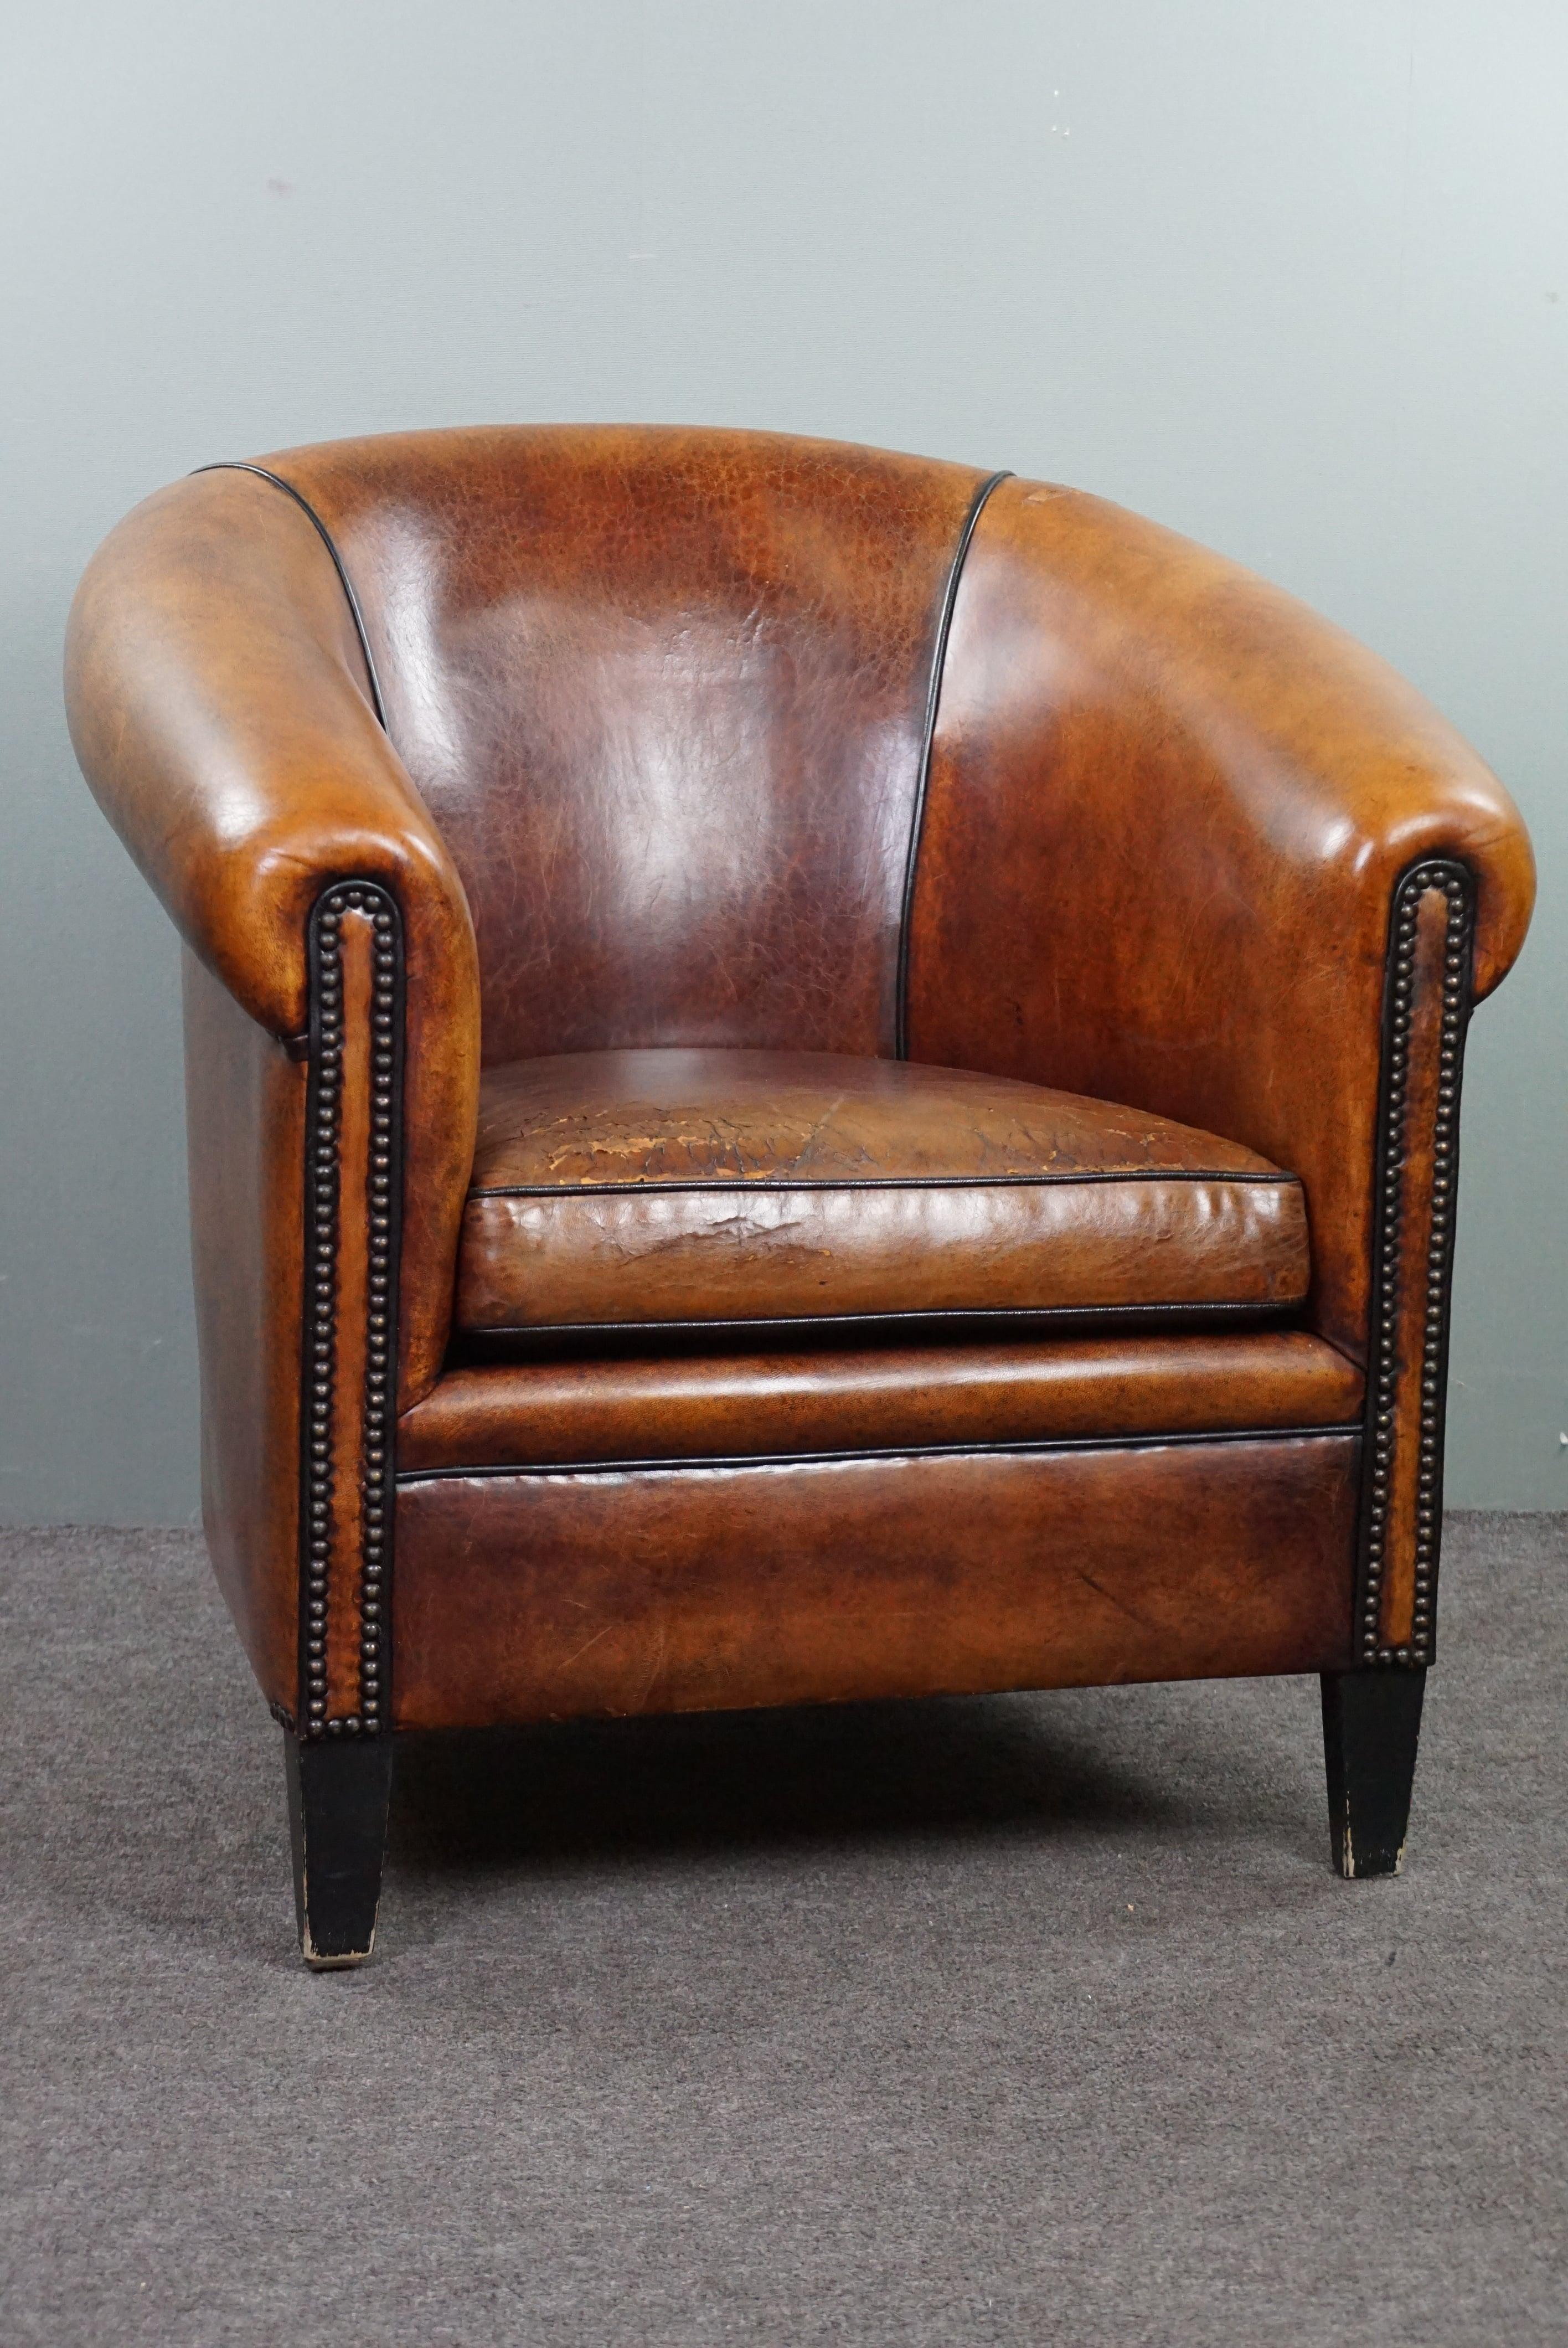 With pride we offer you this beautiful sheep leather club armchair.

This well-crafted club armchair exudes a robust appearance, making it a true centerpiece in almost any interior. The shape, patina, nailhead detailing, and color of this club